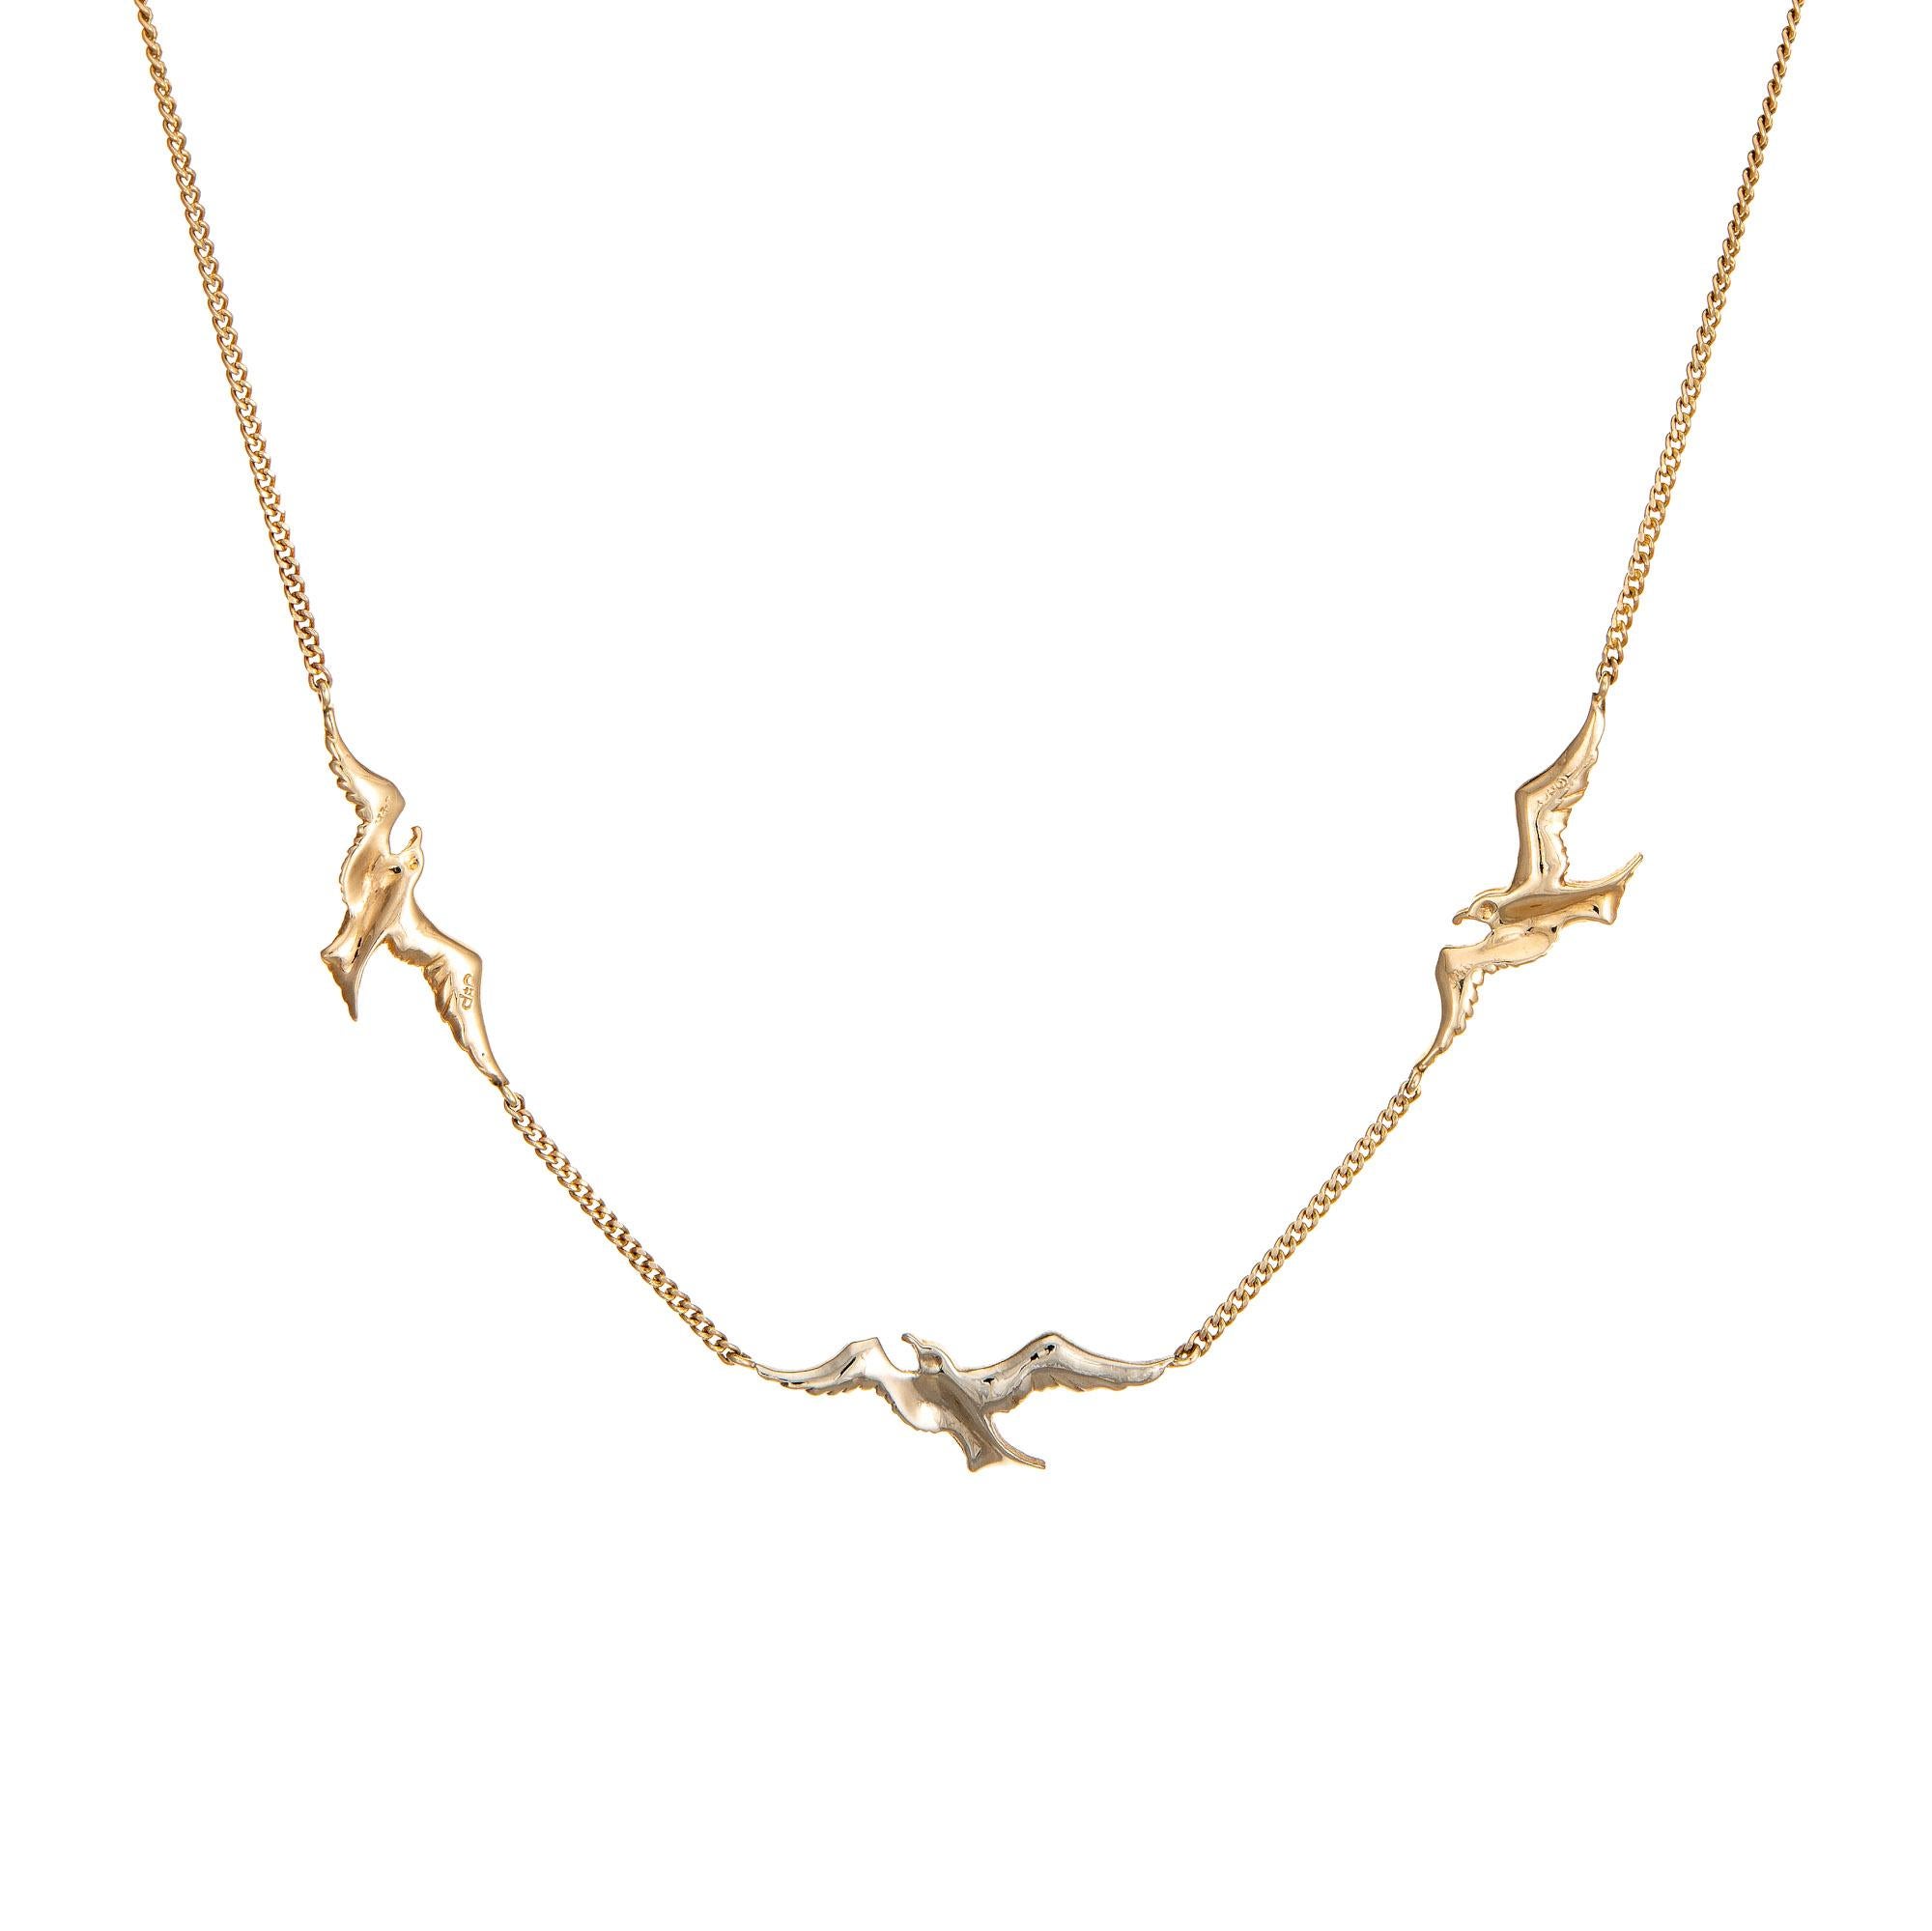 Stylish and finely detailed vintage swallow necklace crafted in 14 karat yellow & white gold (circa 1980s to 1990s).

Three swallows in full flight are embedded into the chain (two in yellow gold and one center set swallow in white gold). The